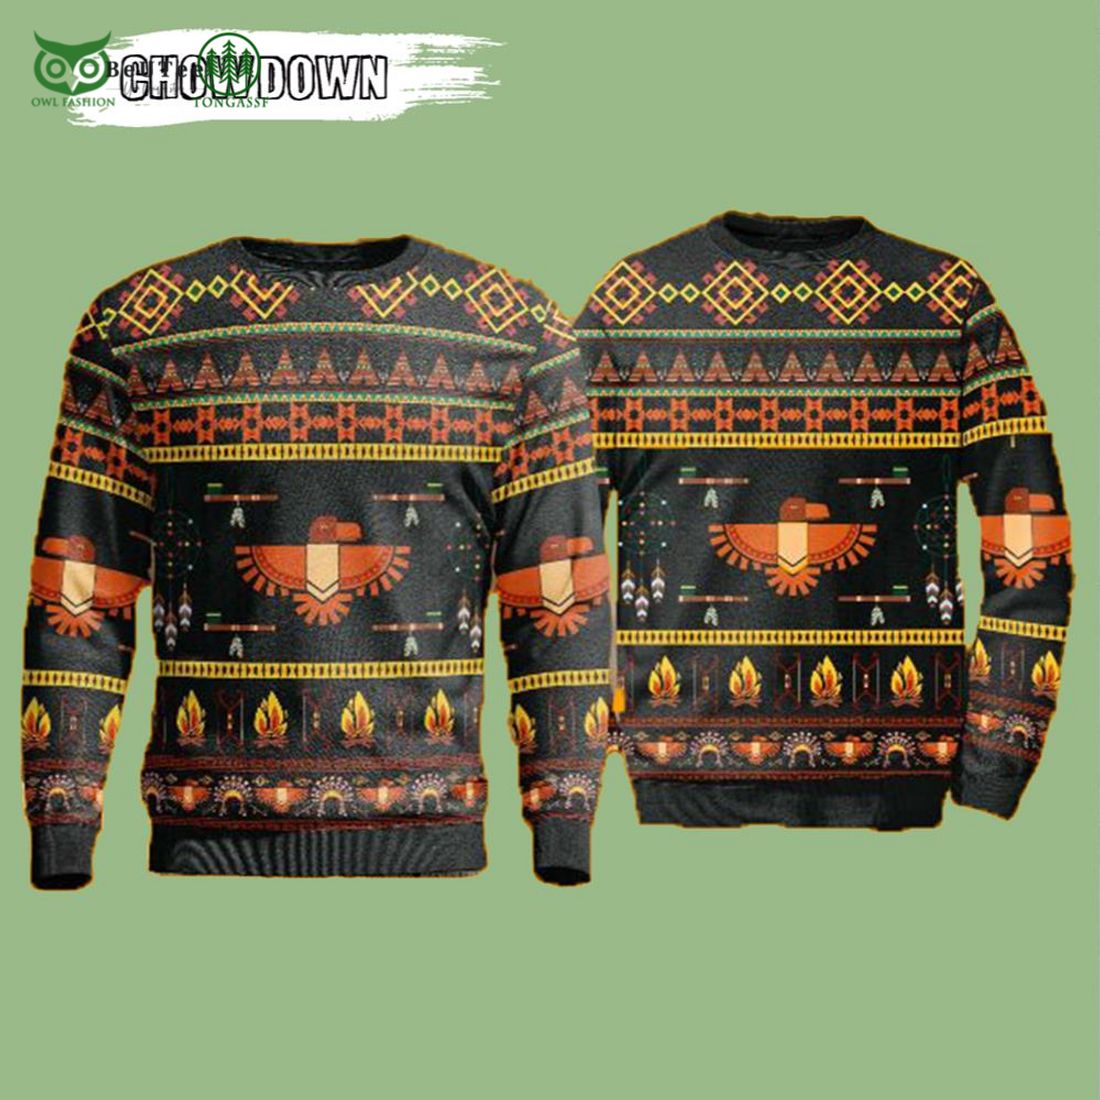 indigenous people tribe cowboy christmas gift 3d ugly christmas sweater 1 Fz0kz